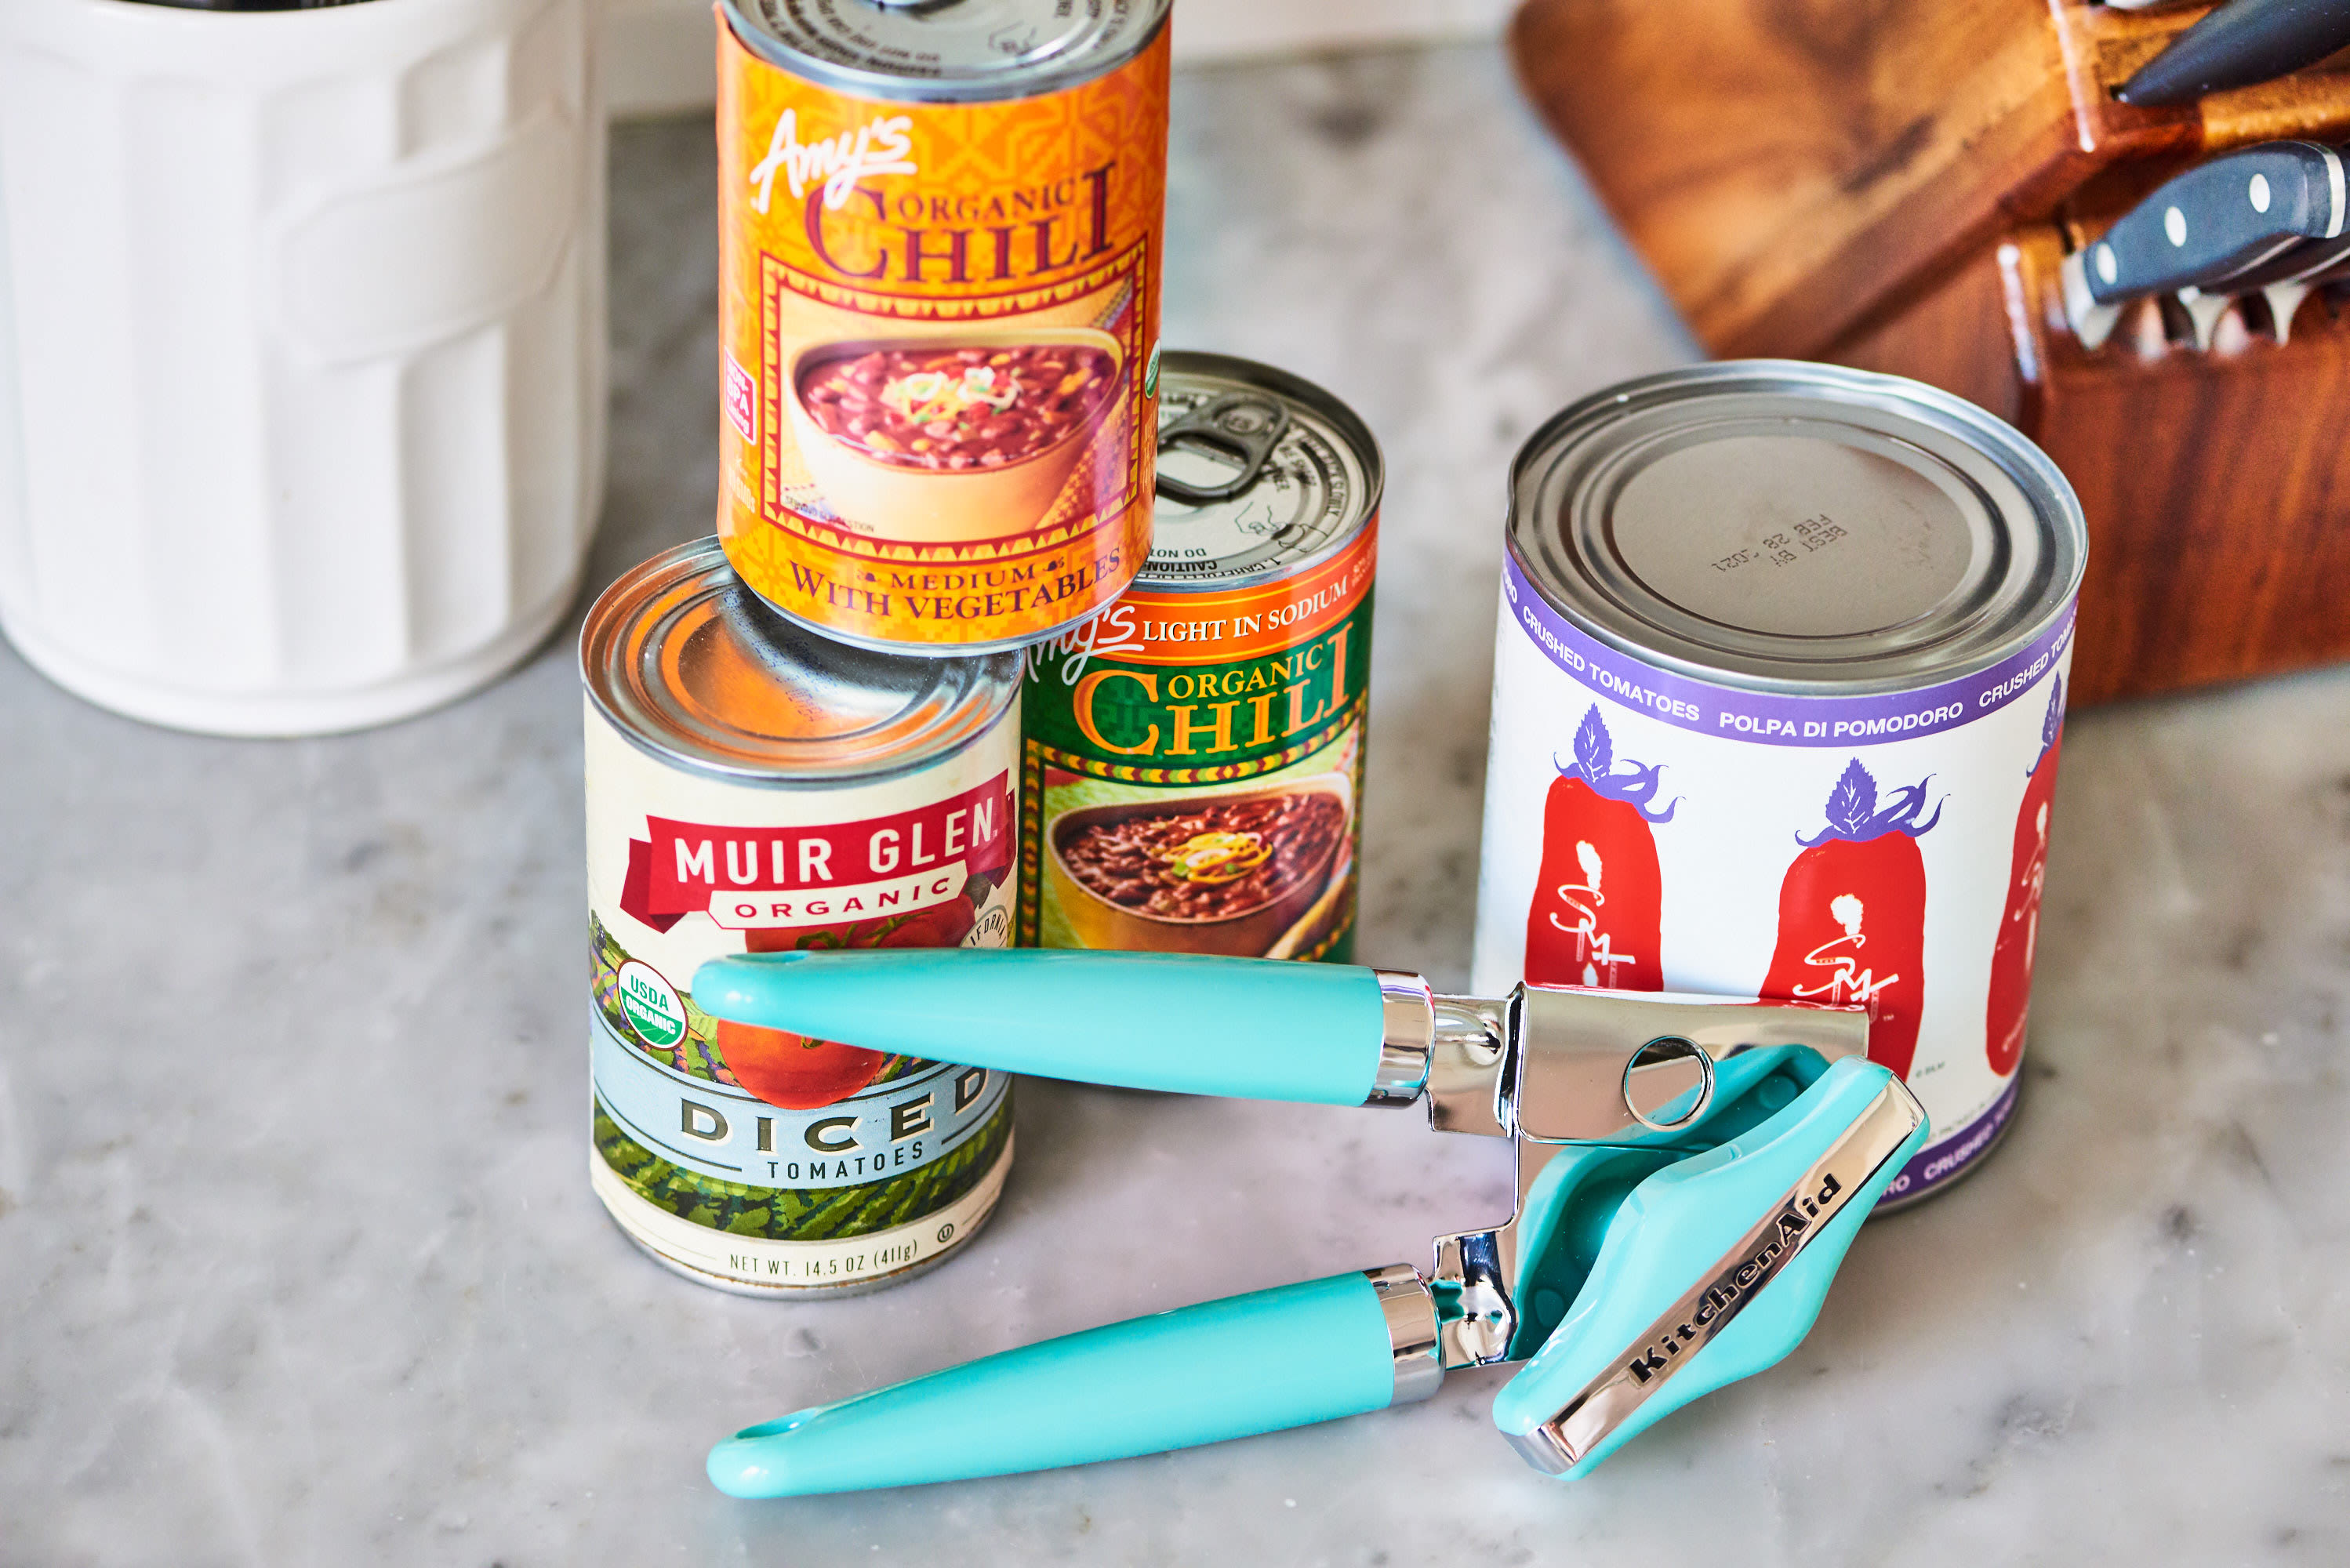 There's A Correct Way To Use A Can Opener, And You Probably Don't Know